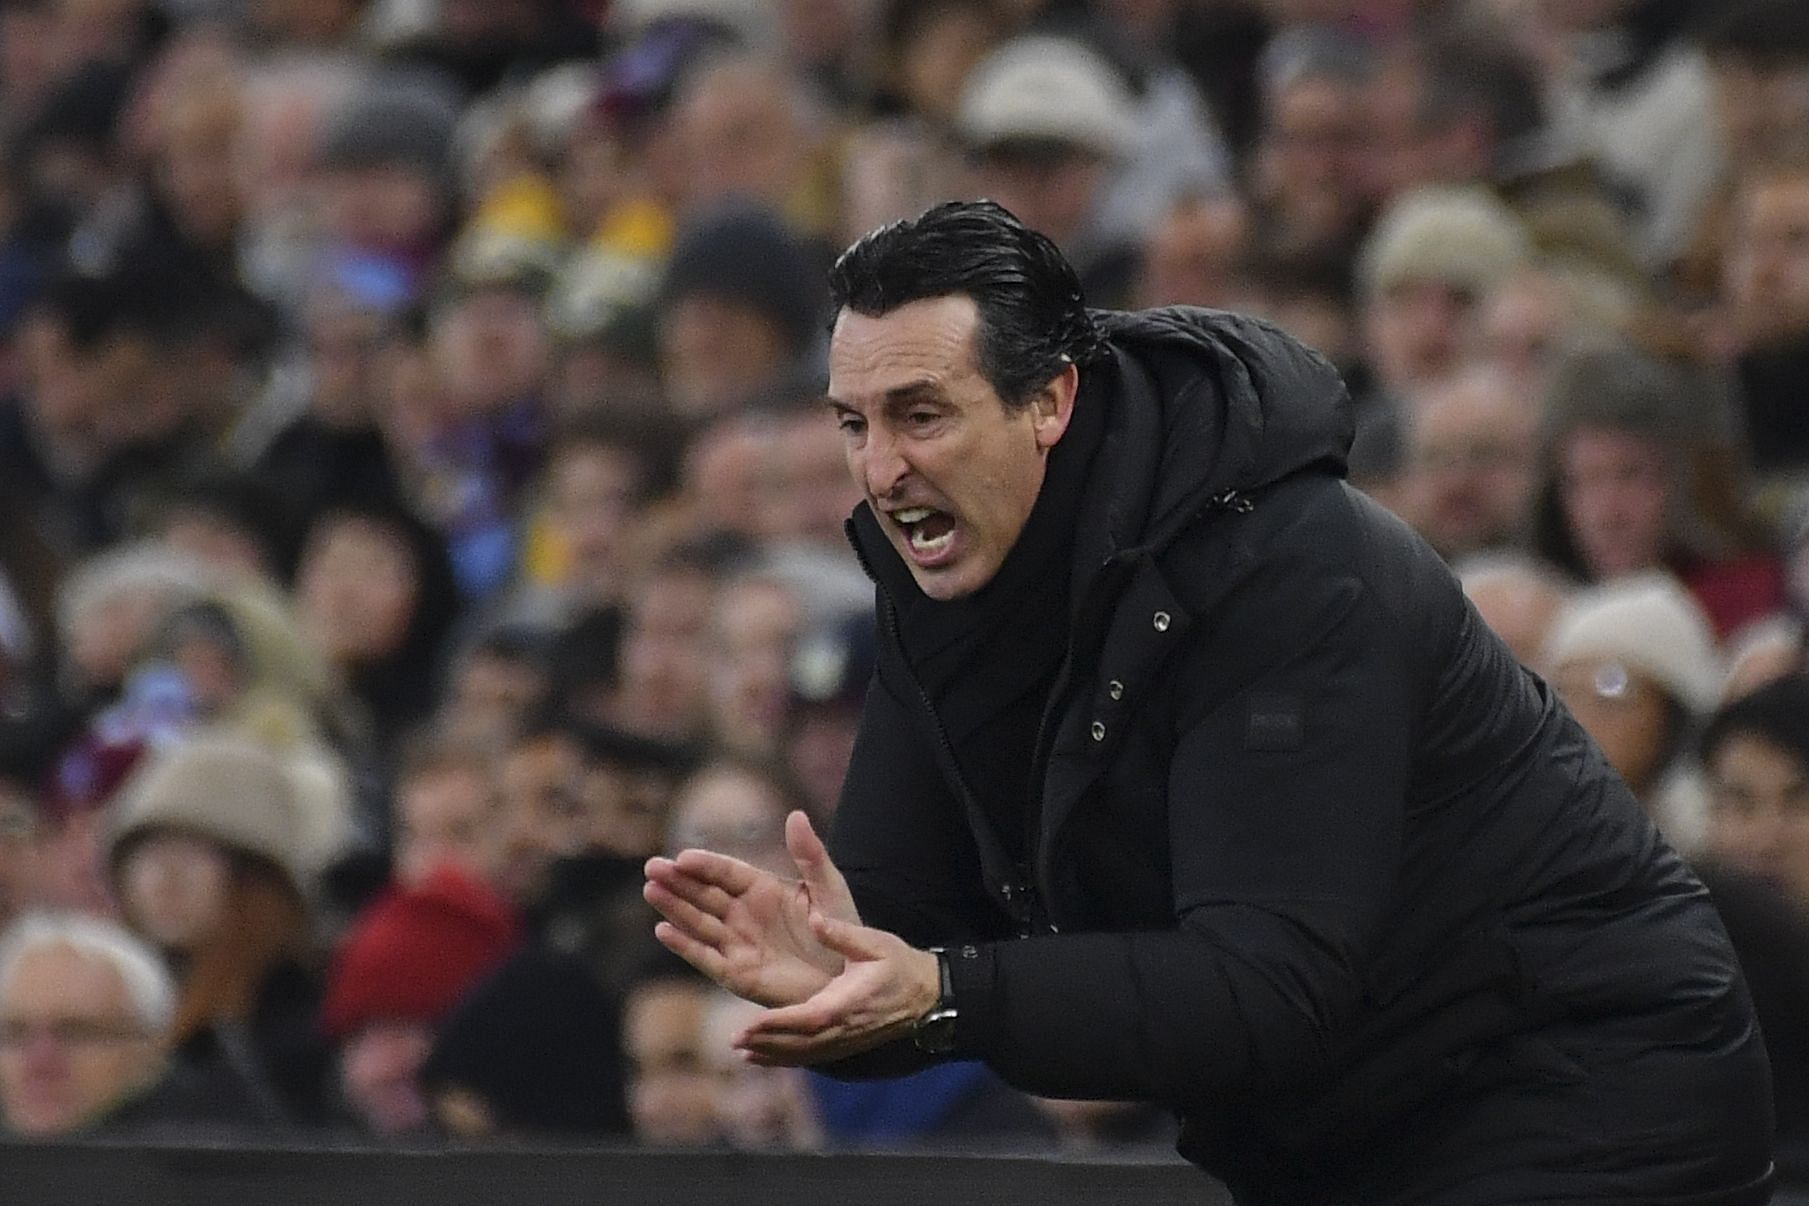 Unai Emery could be an option to replace Erik ten Hag at Old Trafford.